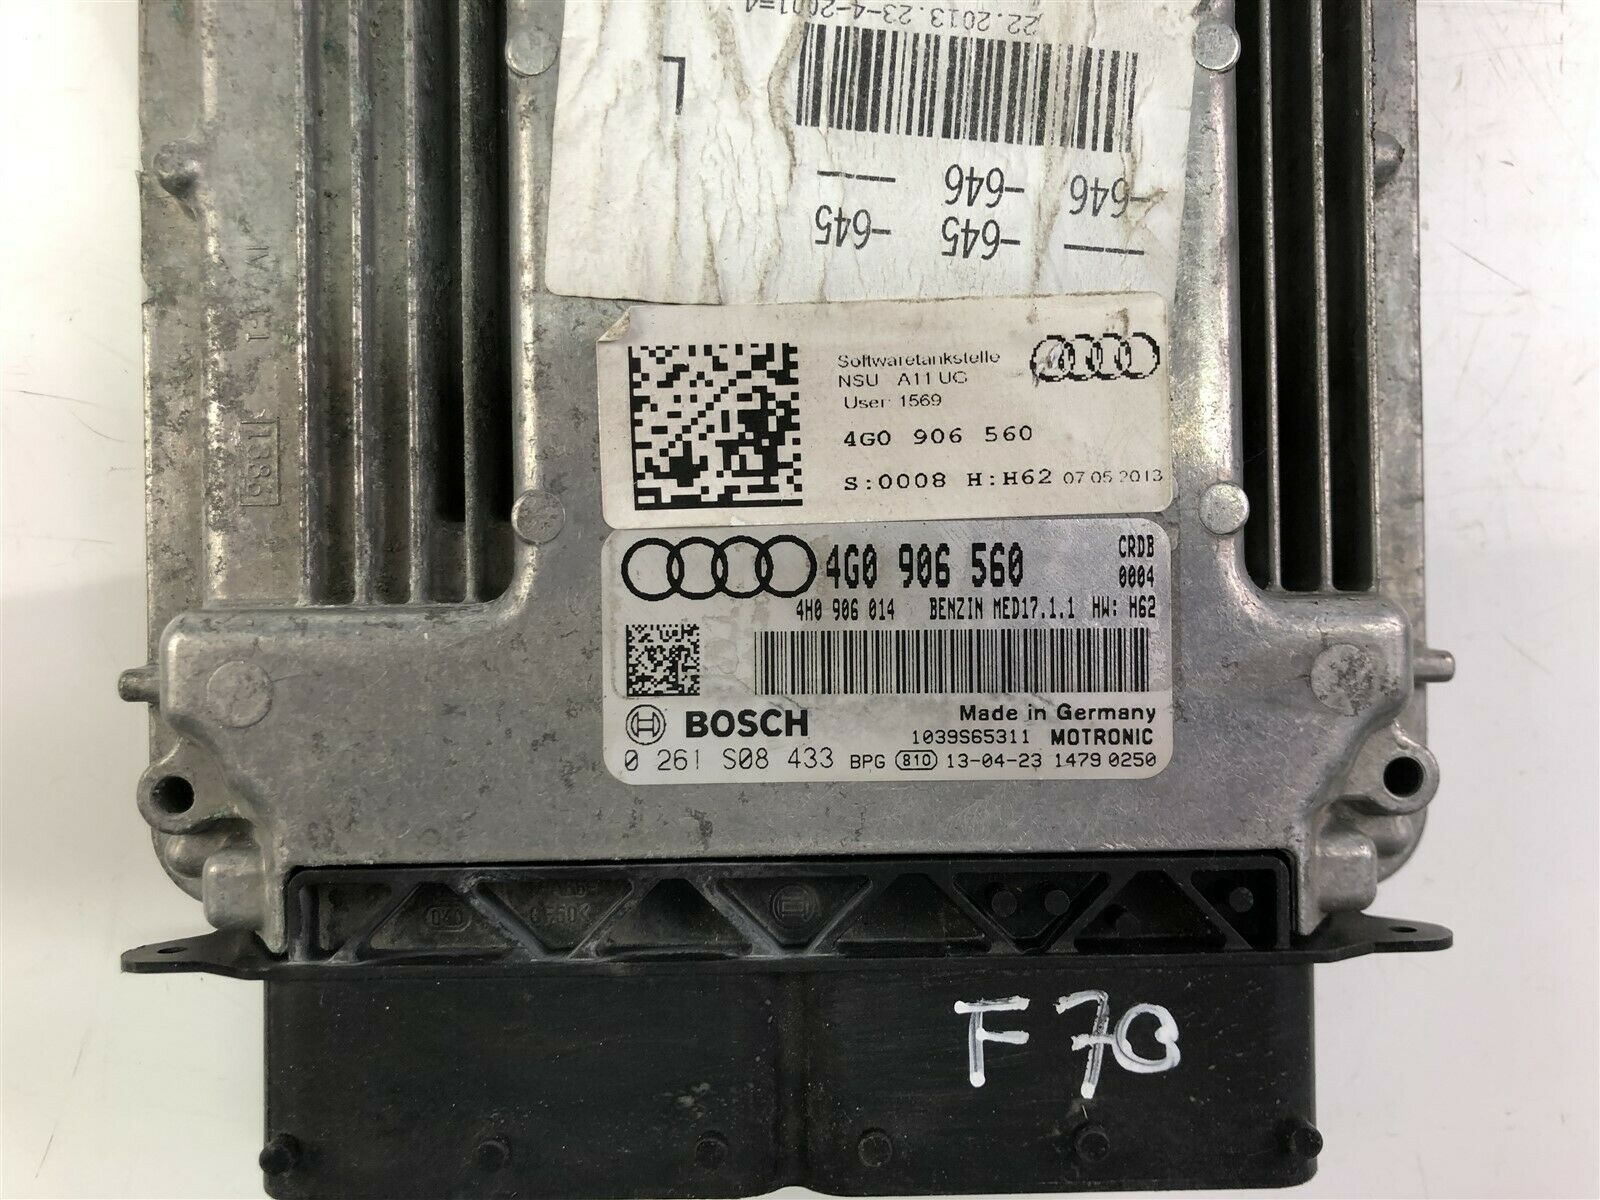 AUDI A7 C7/4G (2010-2020) Other Control Units 4G0906560, 0261S08433 23431792